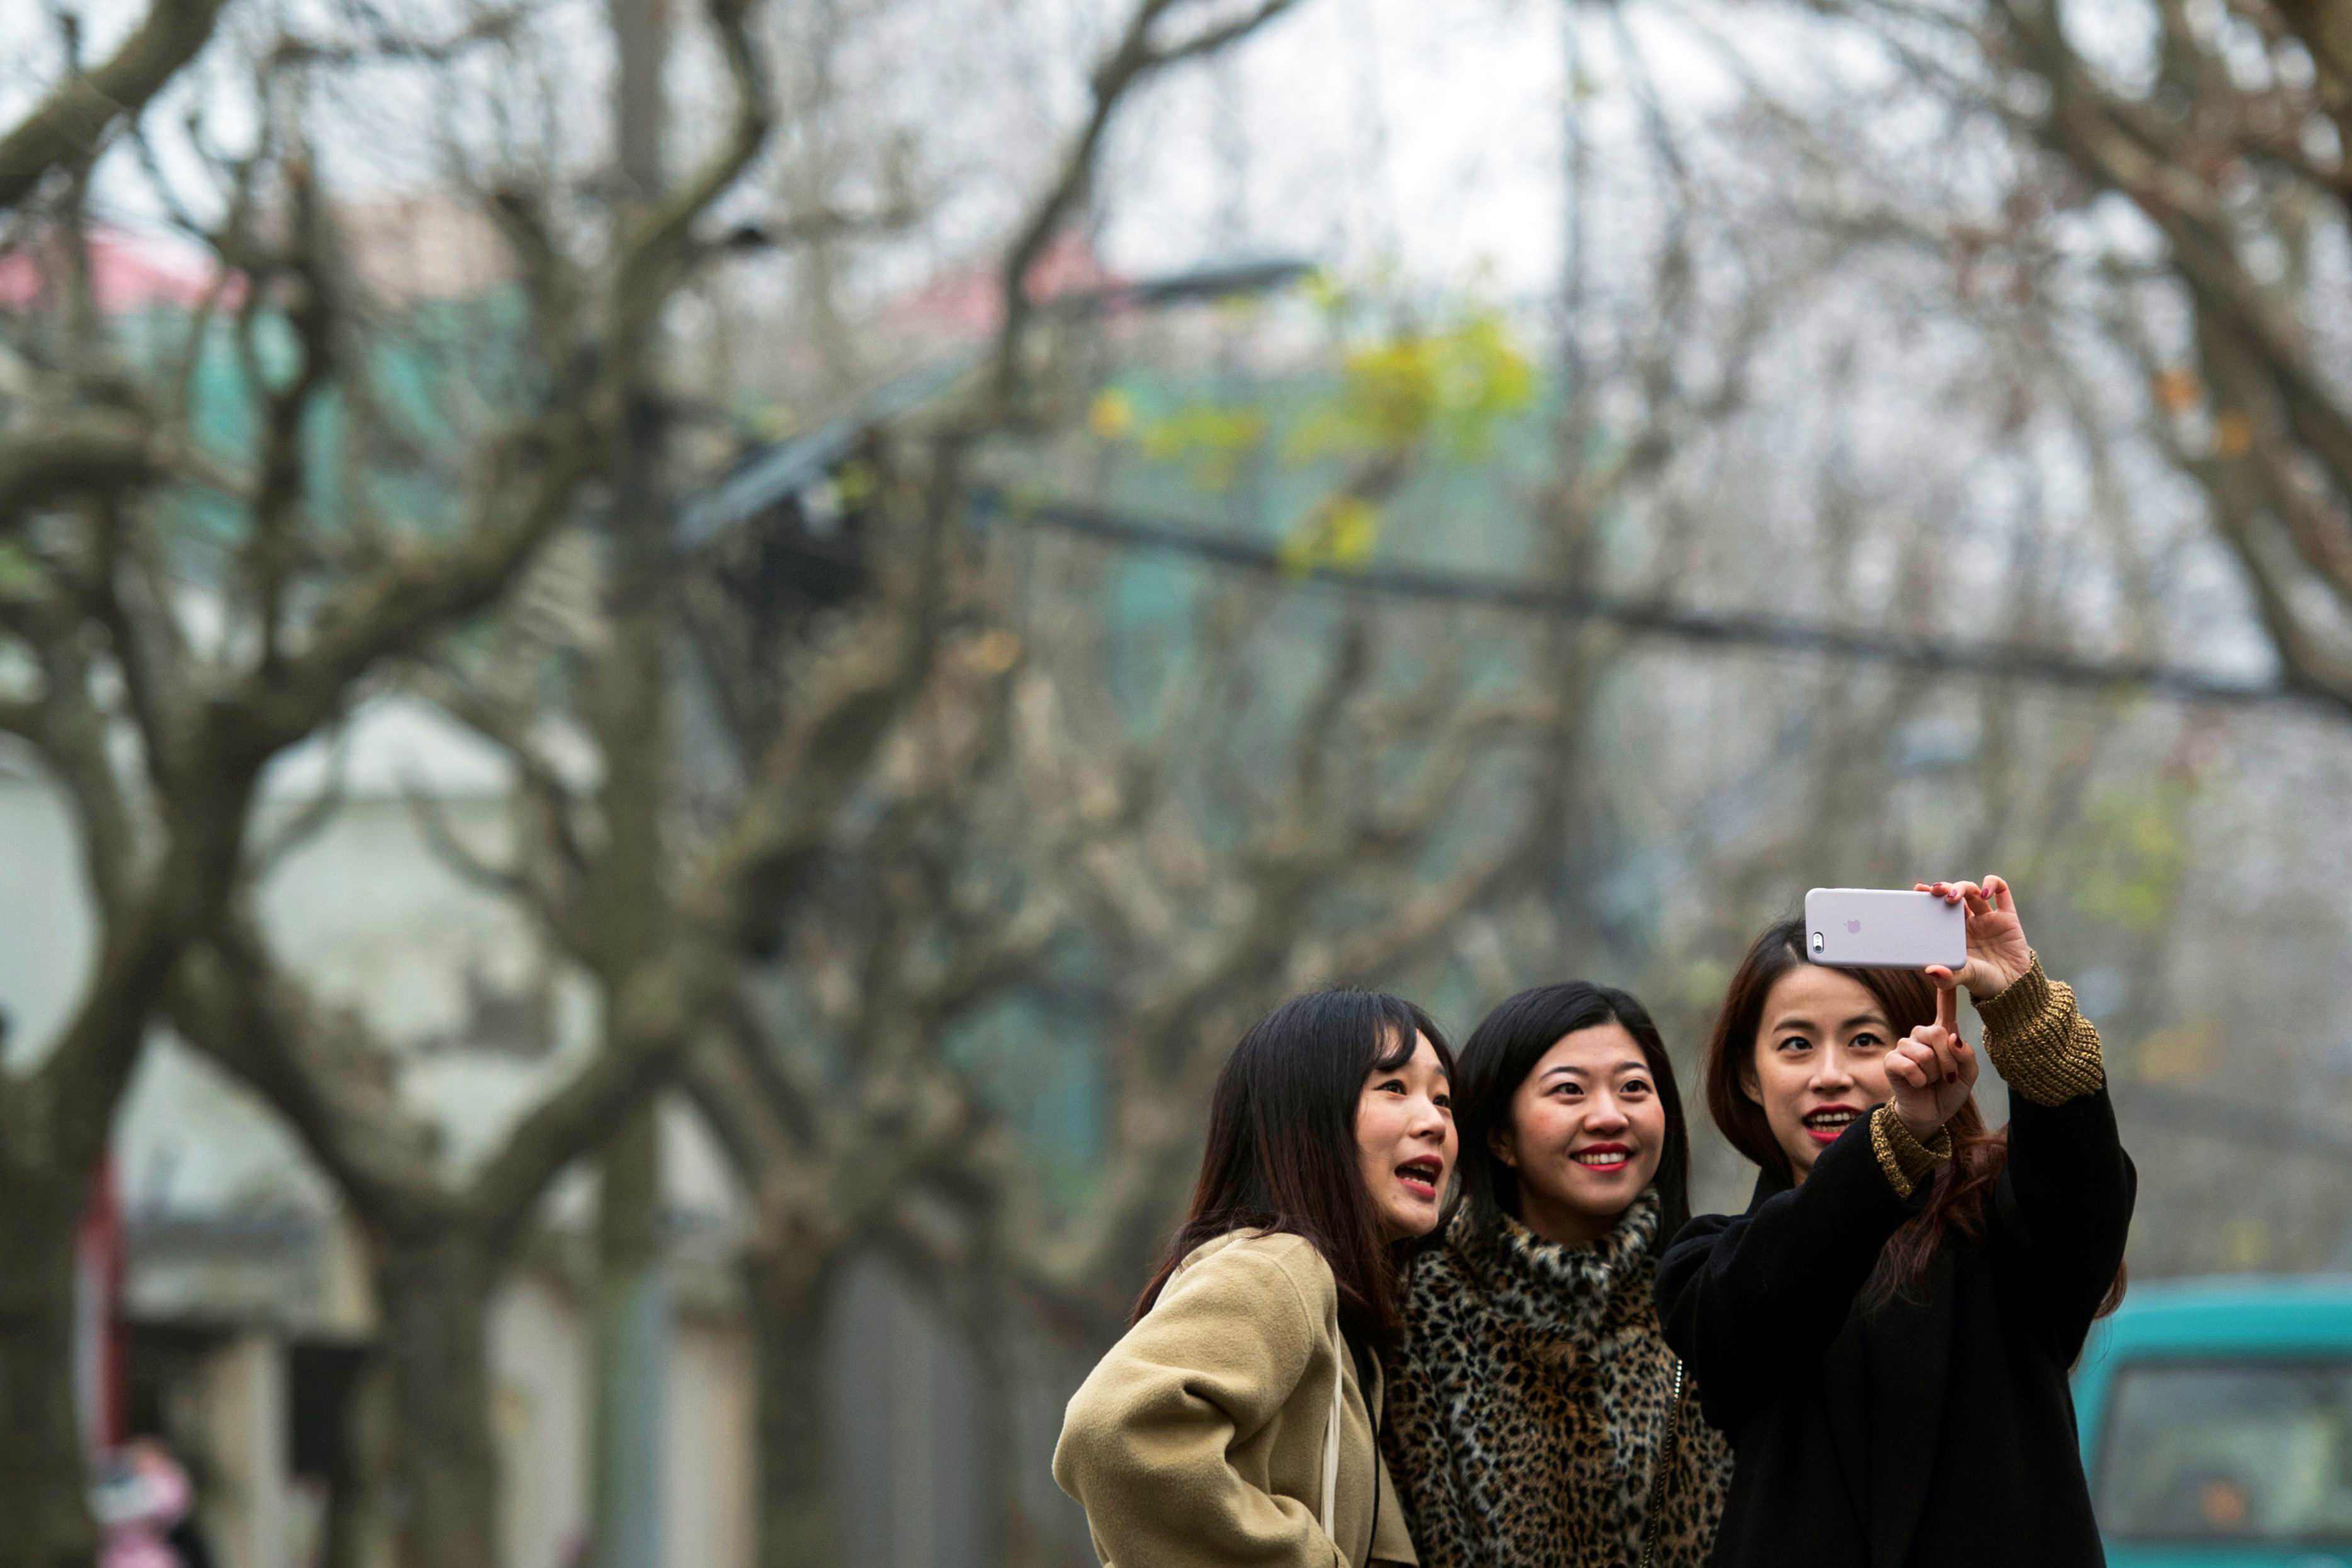 Most of Chinese social networks revolve around selfies and videos taken with 